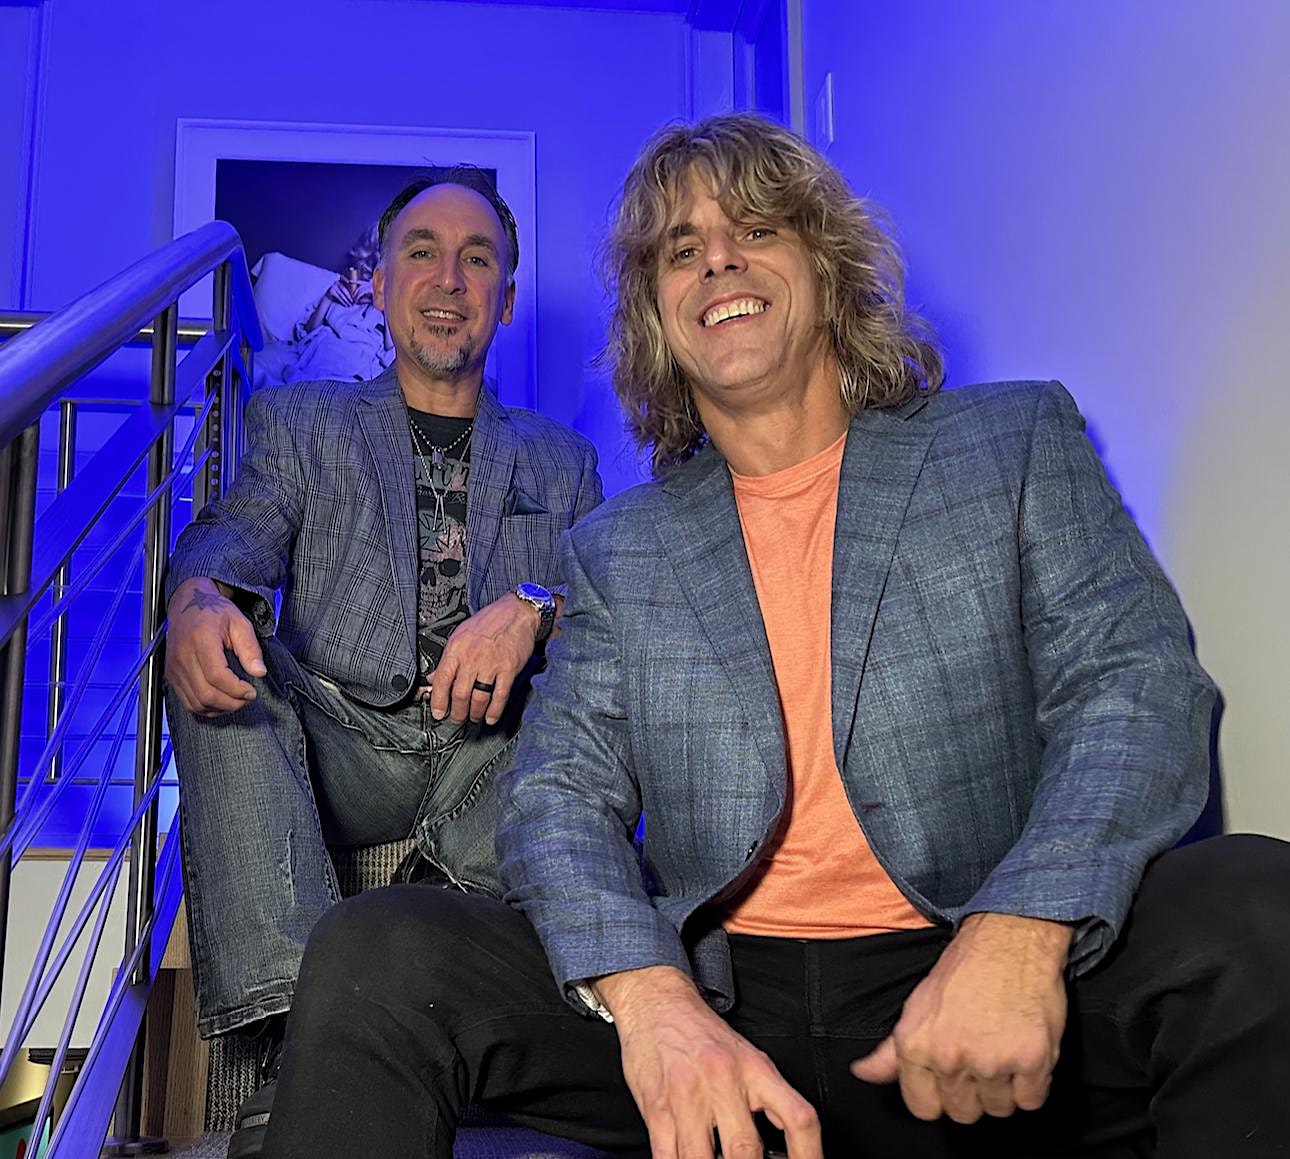 Two men sitting on stairs in a blue room.